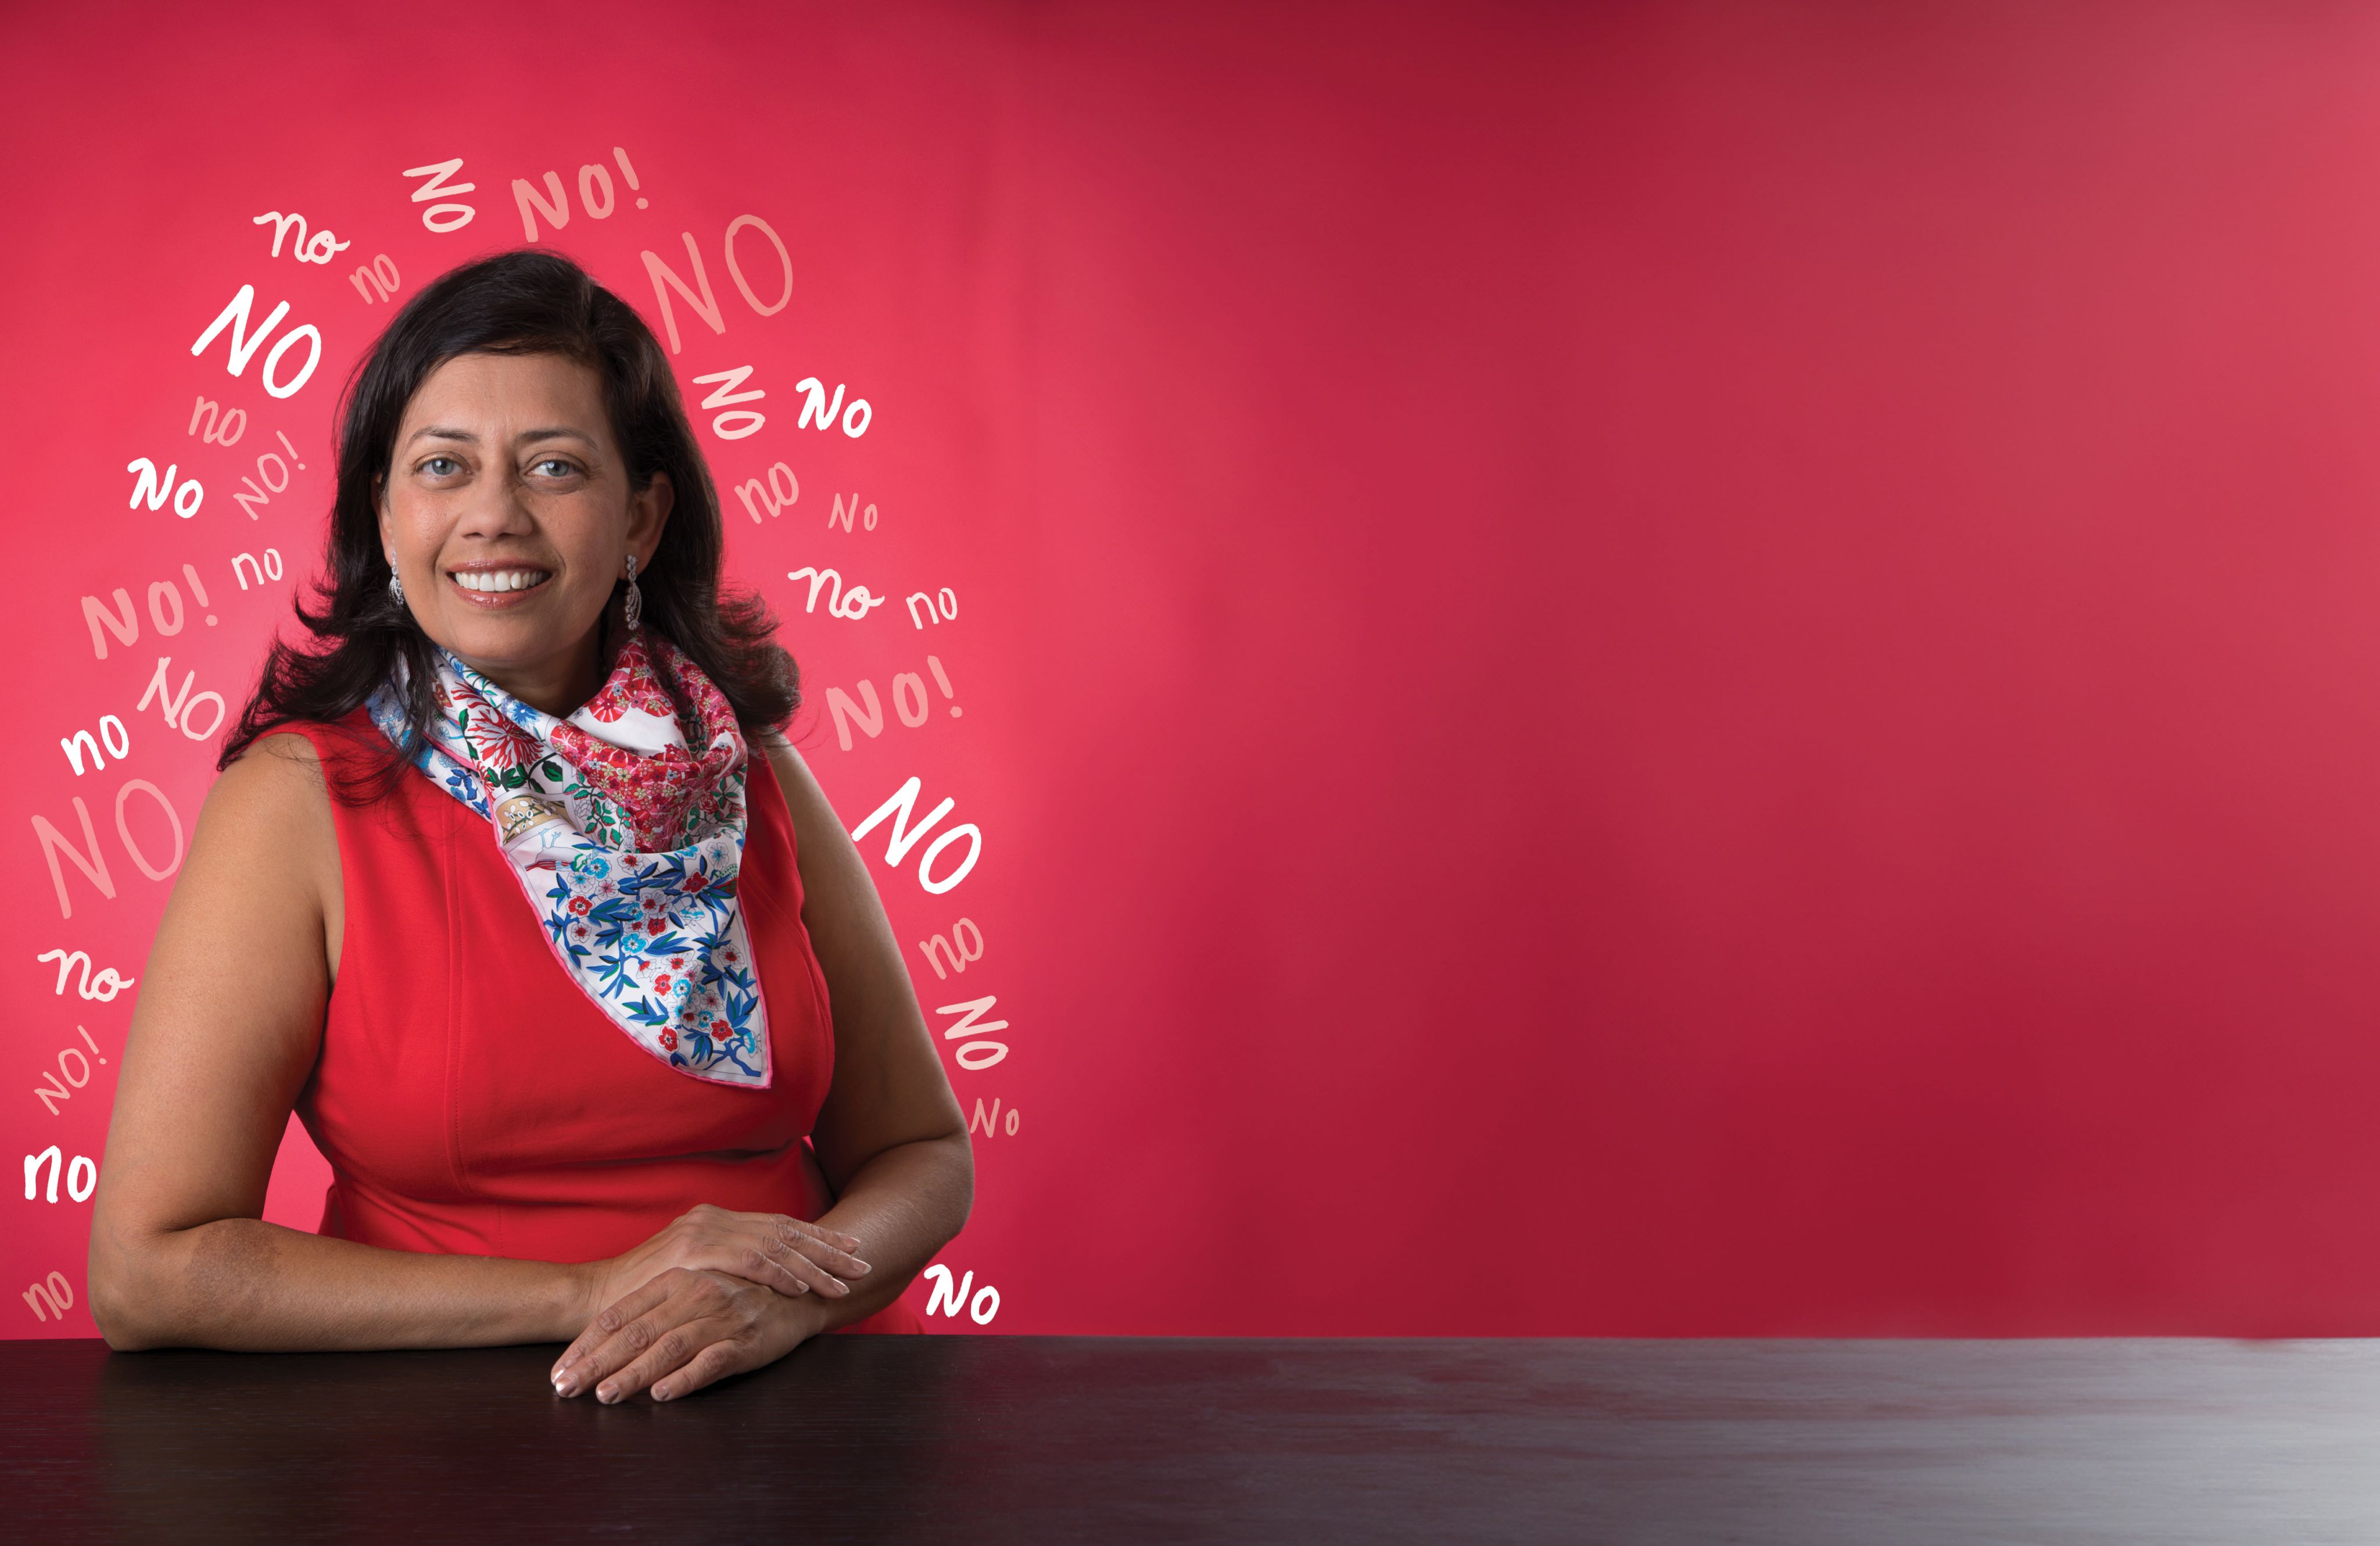 Professor Vanessa Patrick wearing a red sleeveless dress with a colorful scarf. She is in front of a red background and the word "No" is written in multiple styles all around her.